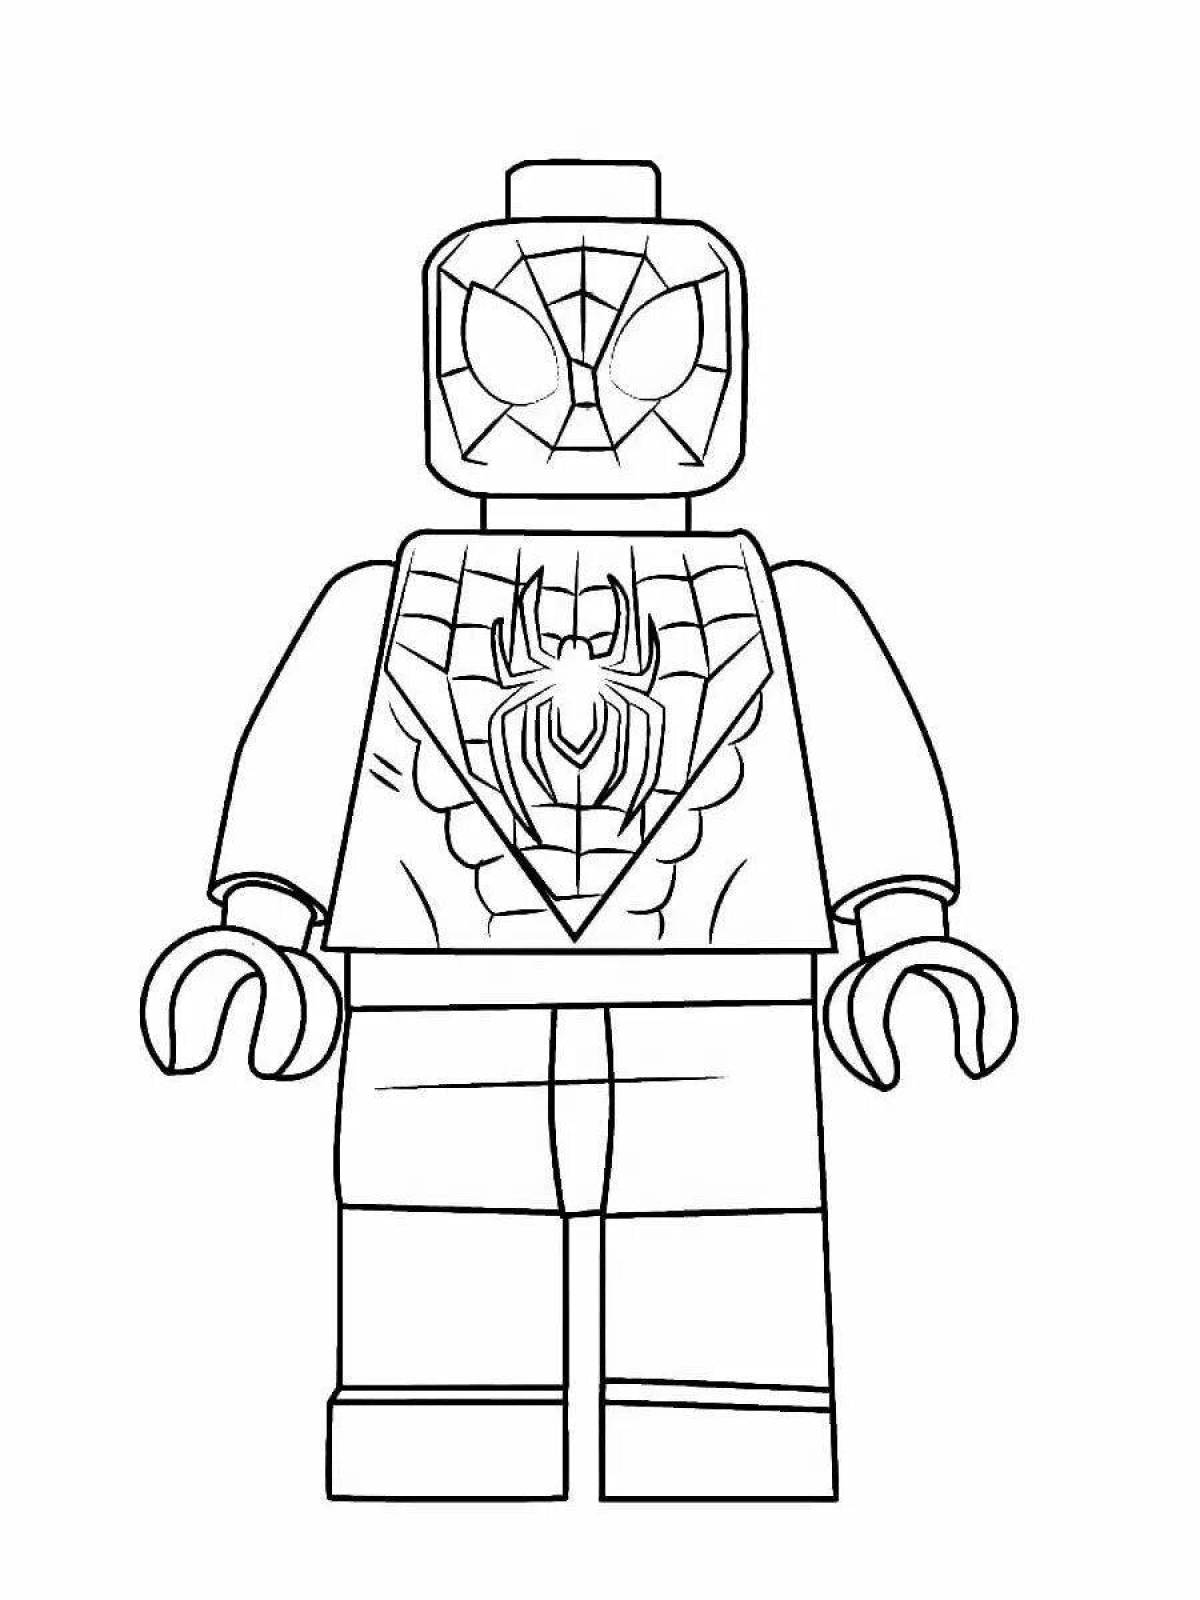 Playful lego spiderman coloring page